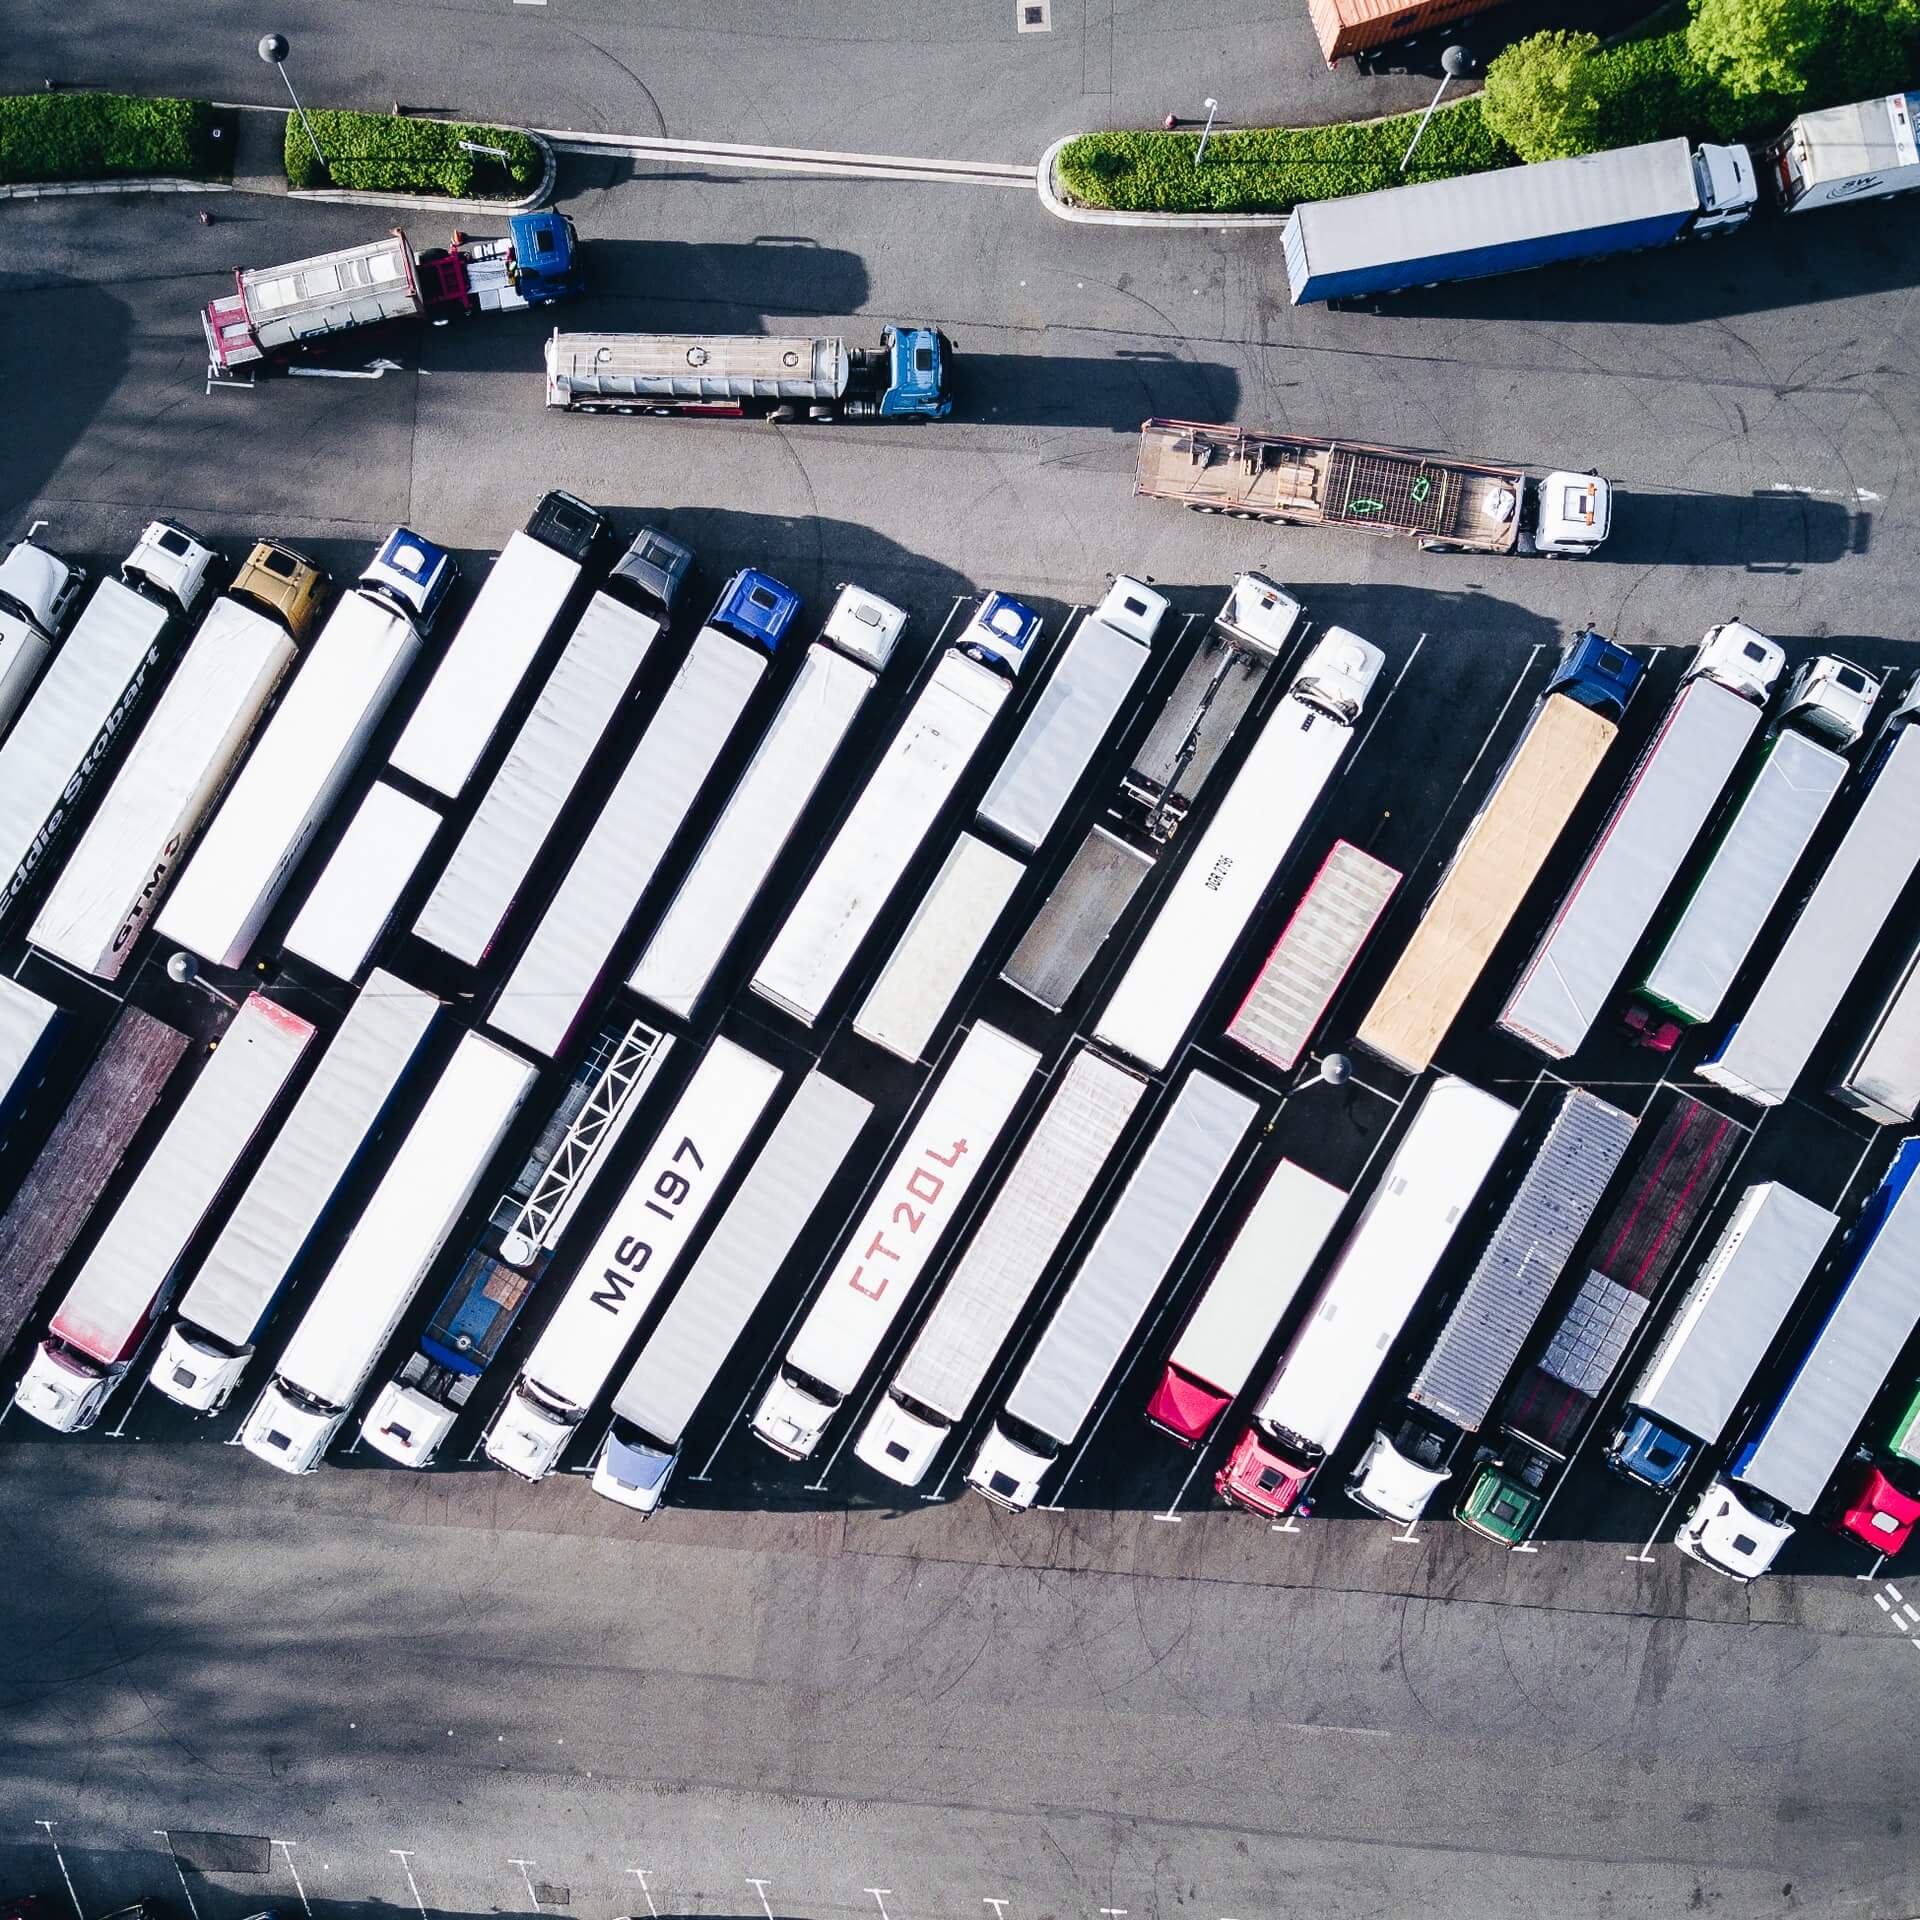 Top 4 Freight transportation issues and how to avoid them